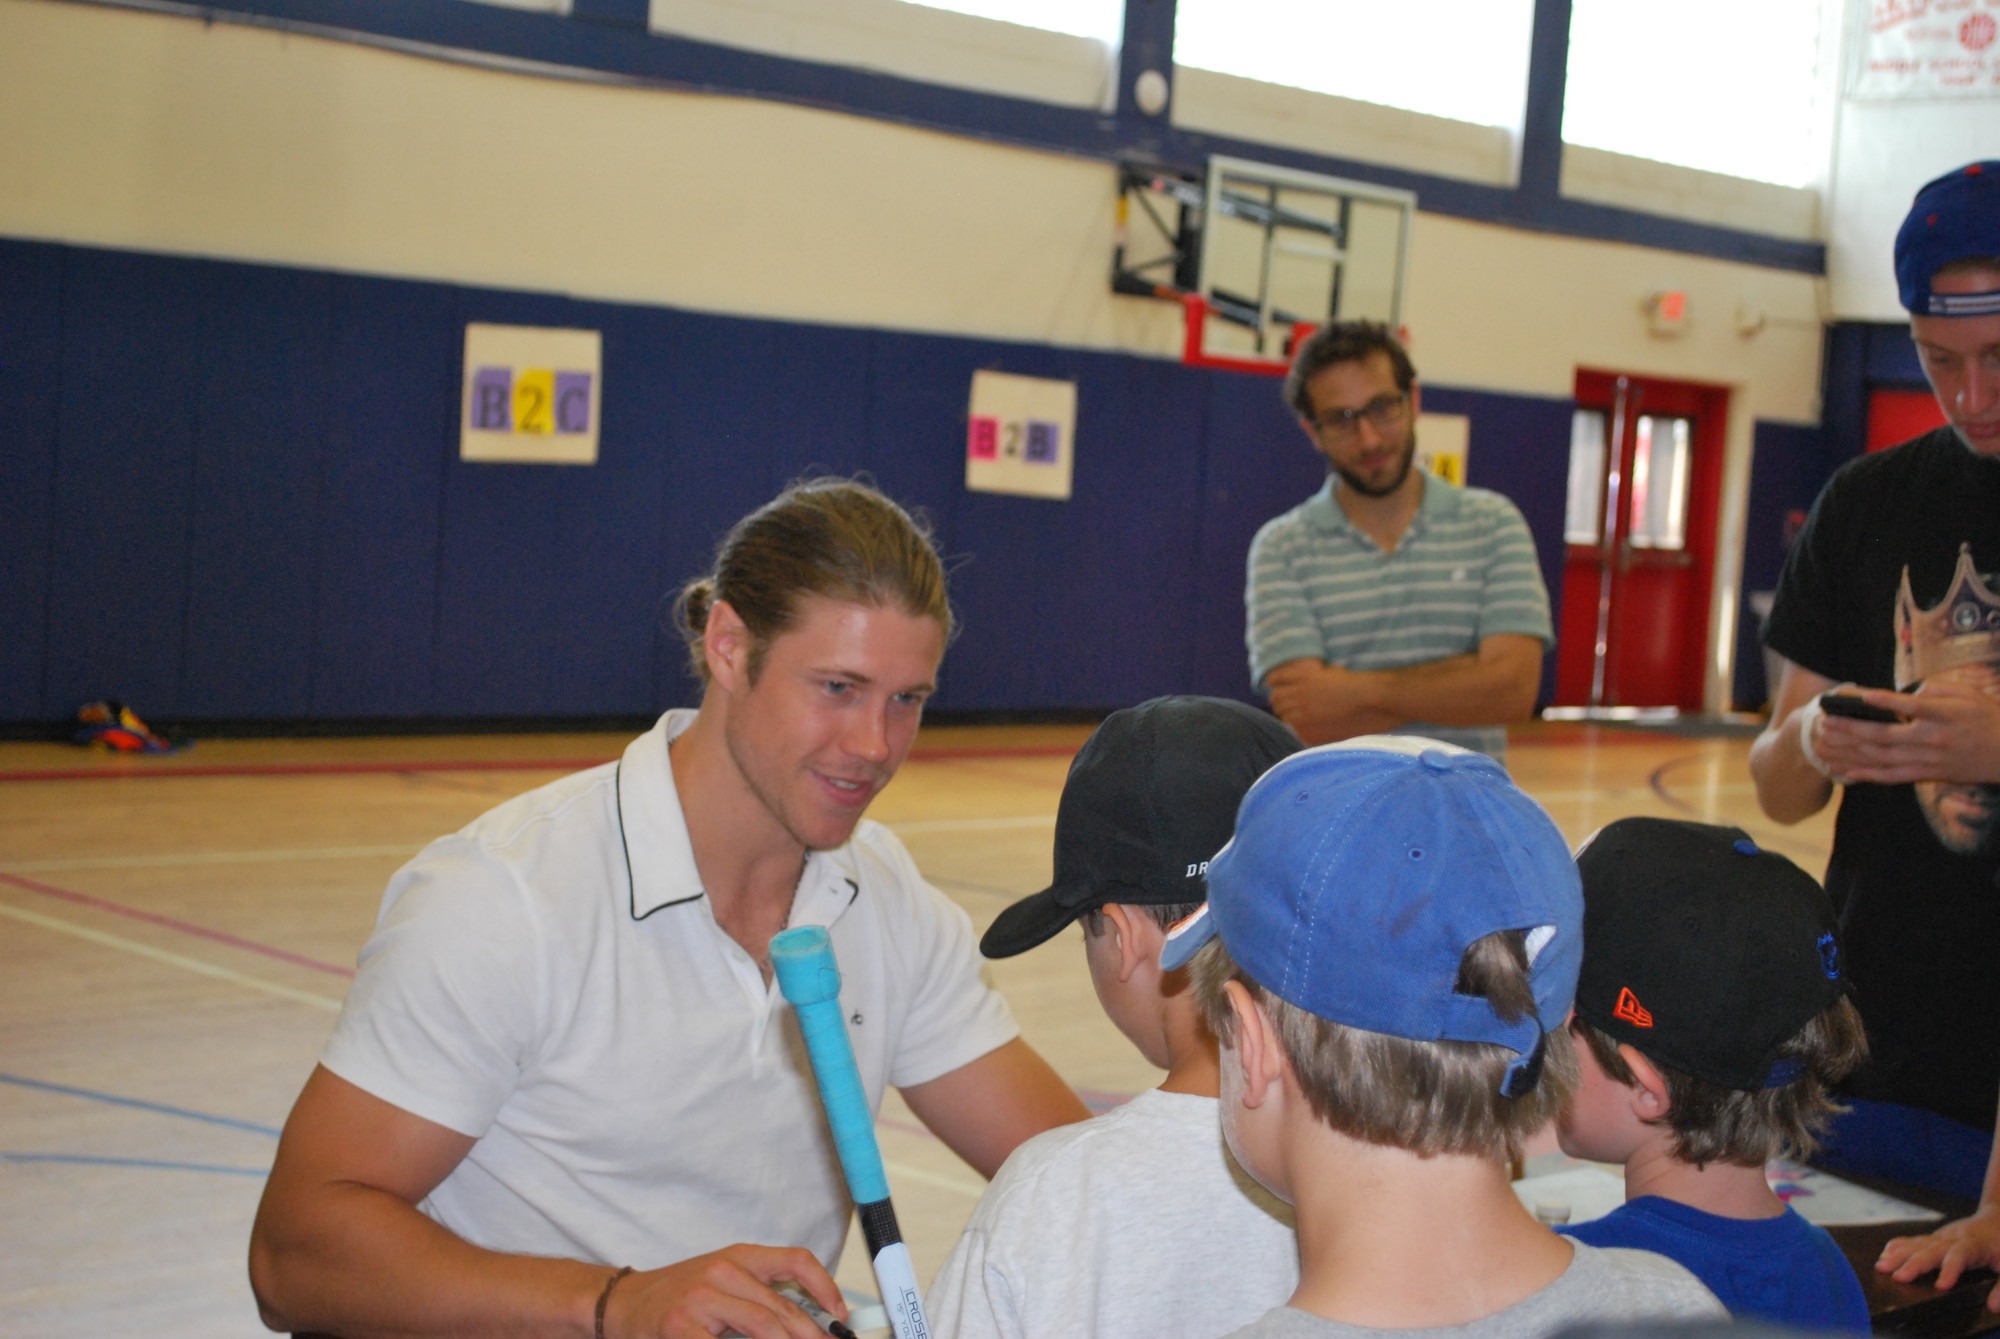 Islander Matt Martin signed autographs for Hillel campers after speaking to them about how he got to the National Hockey League.